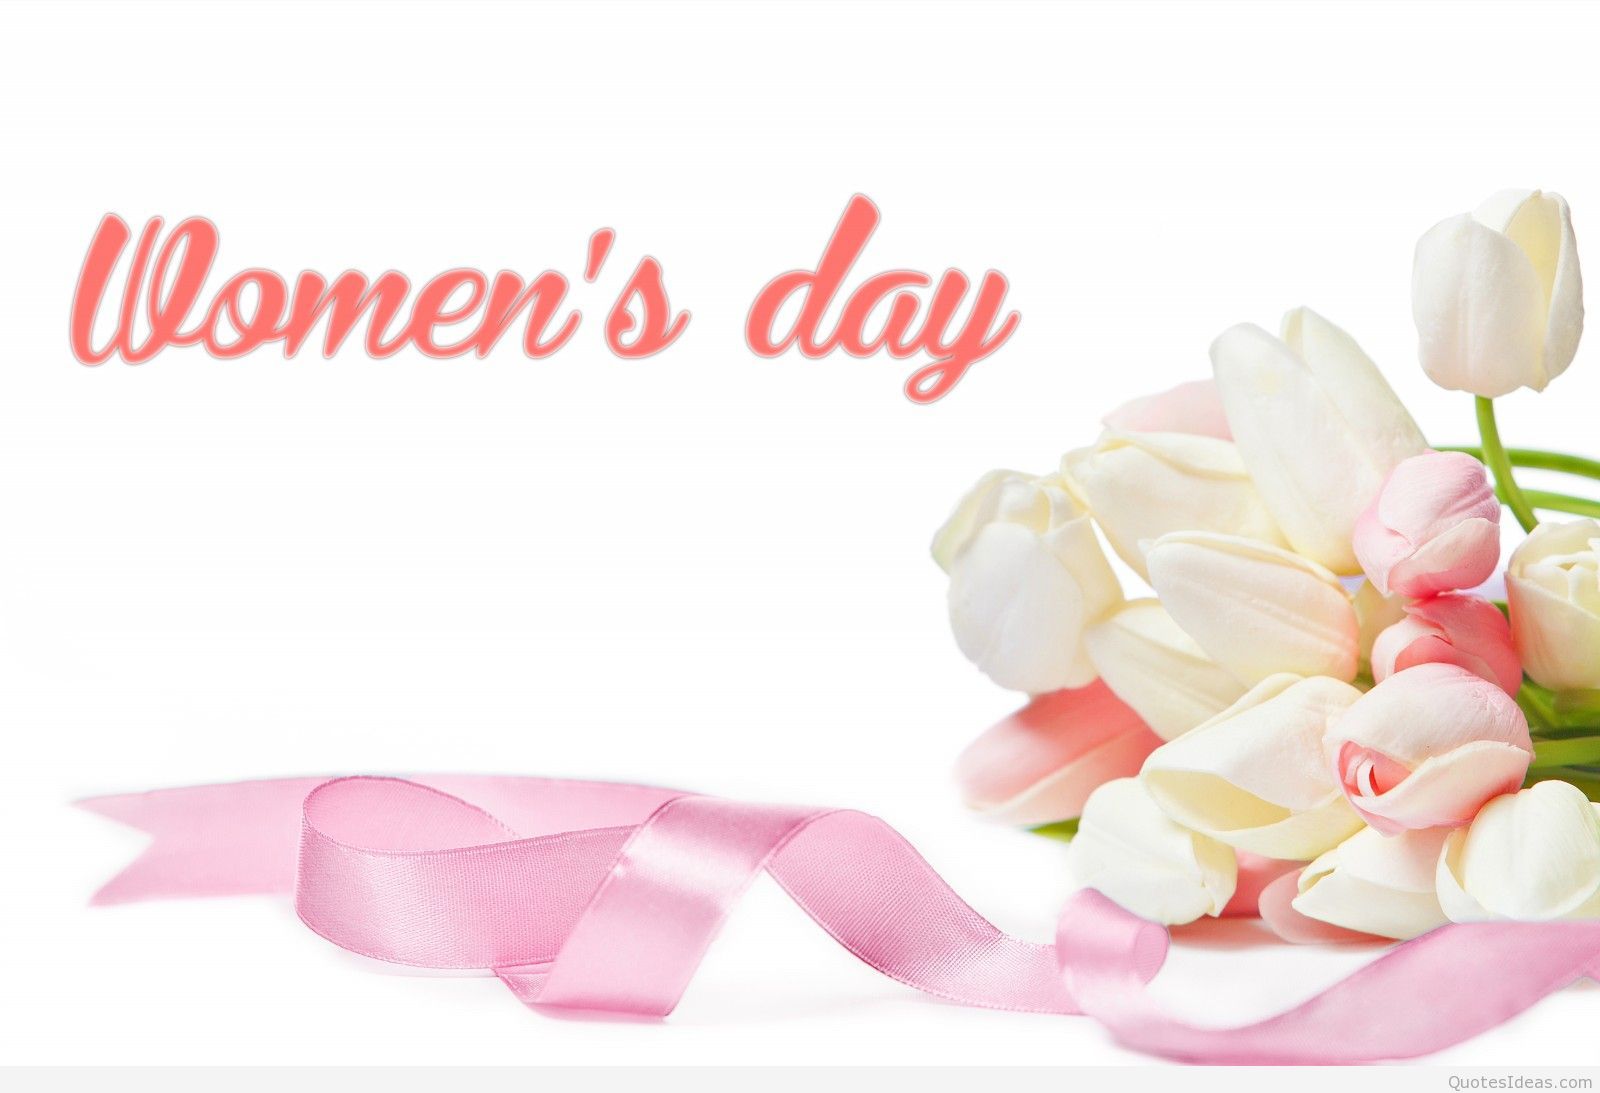 Happy international women's day 8 march wallpaper quotes